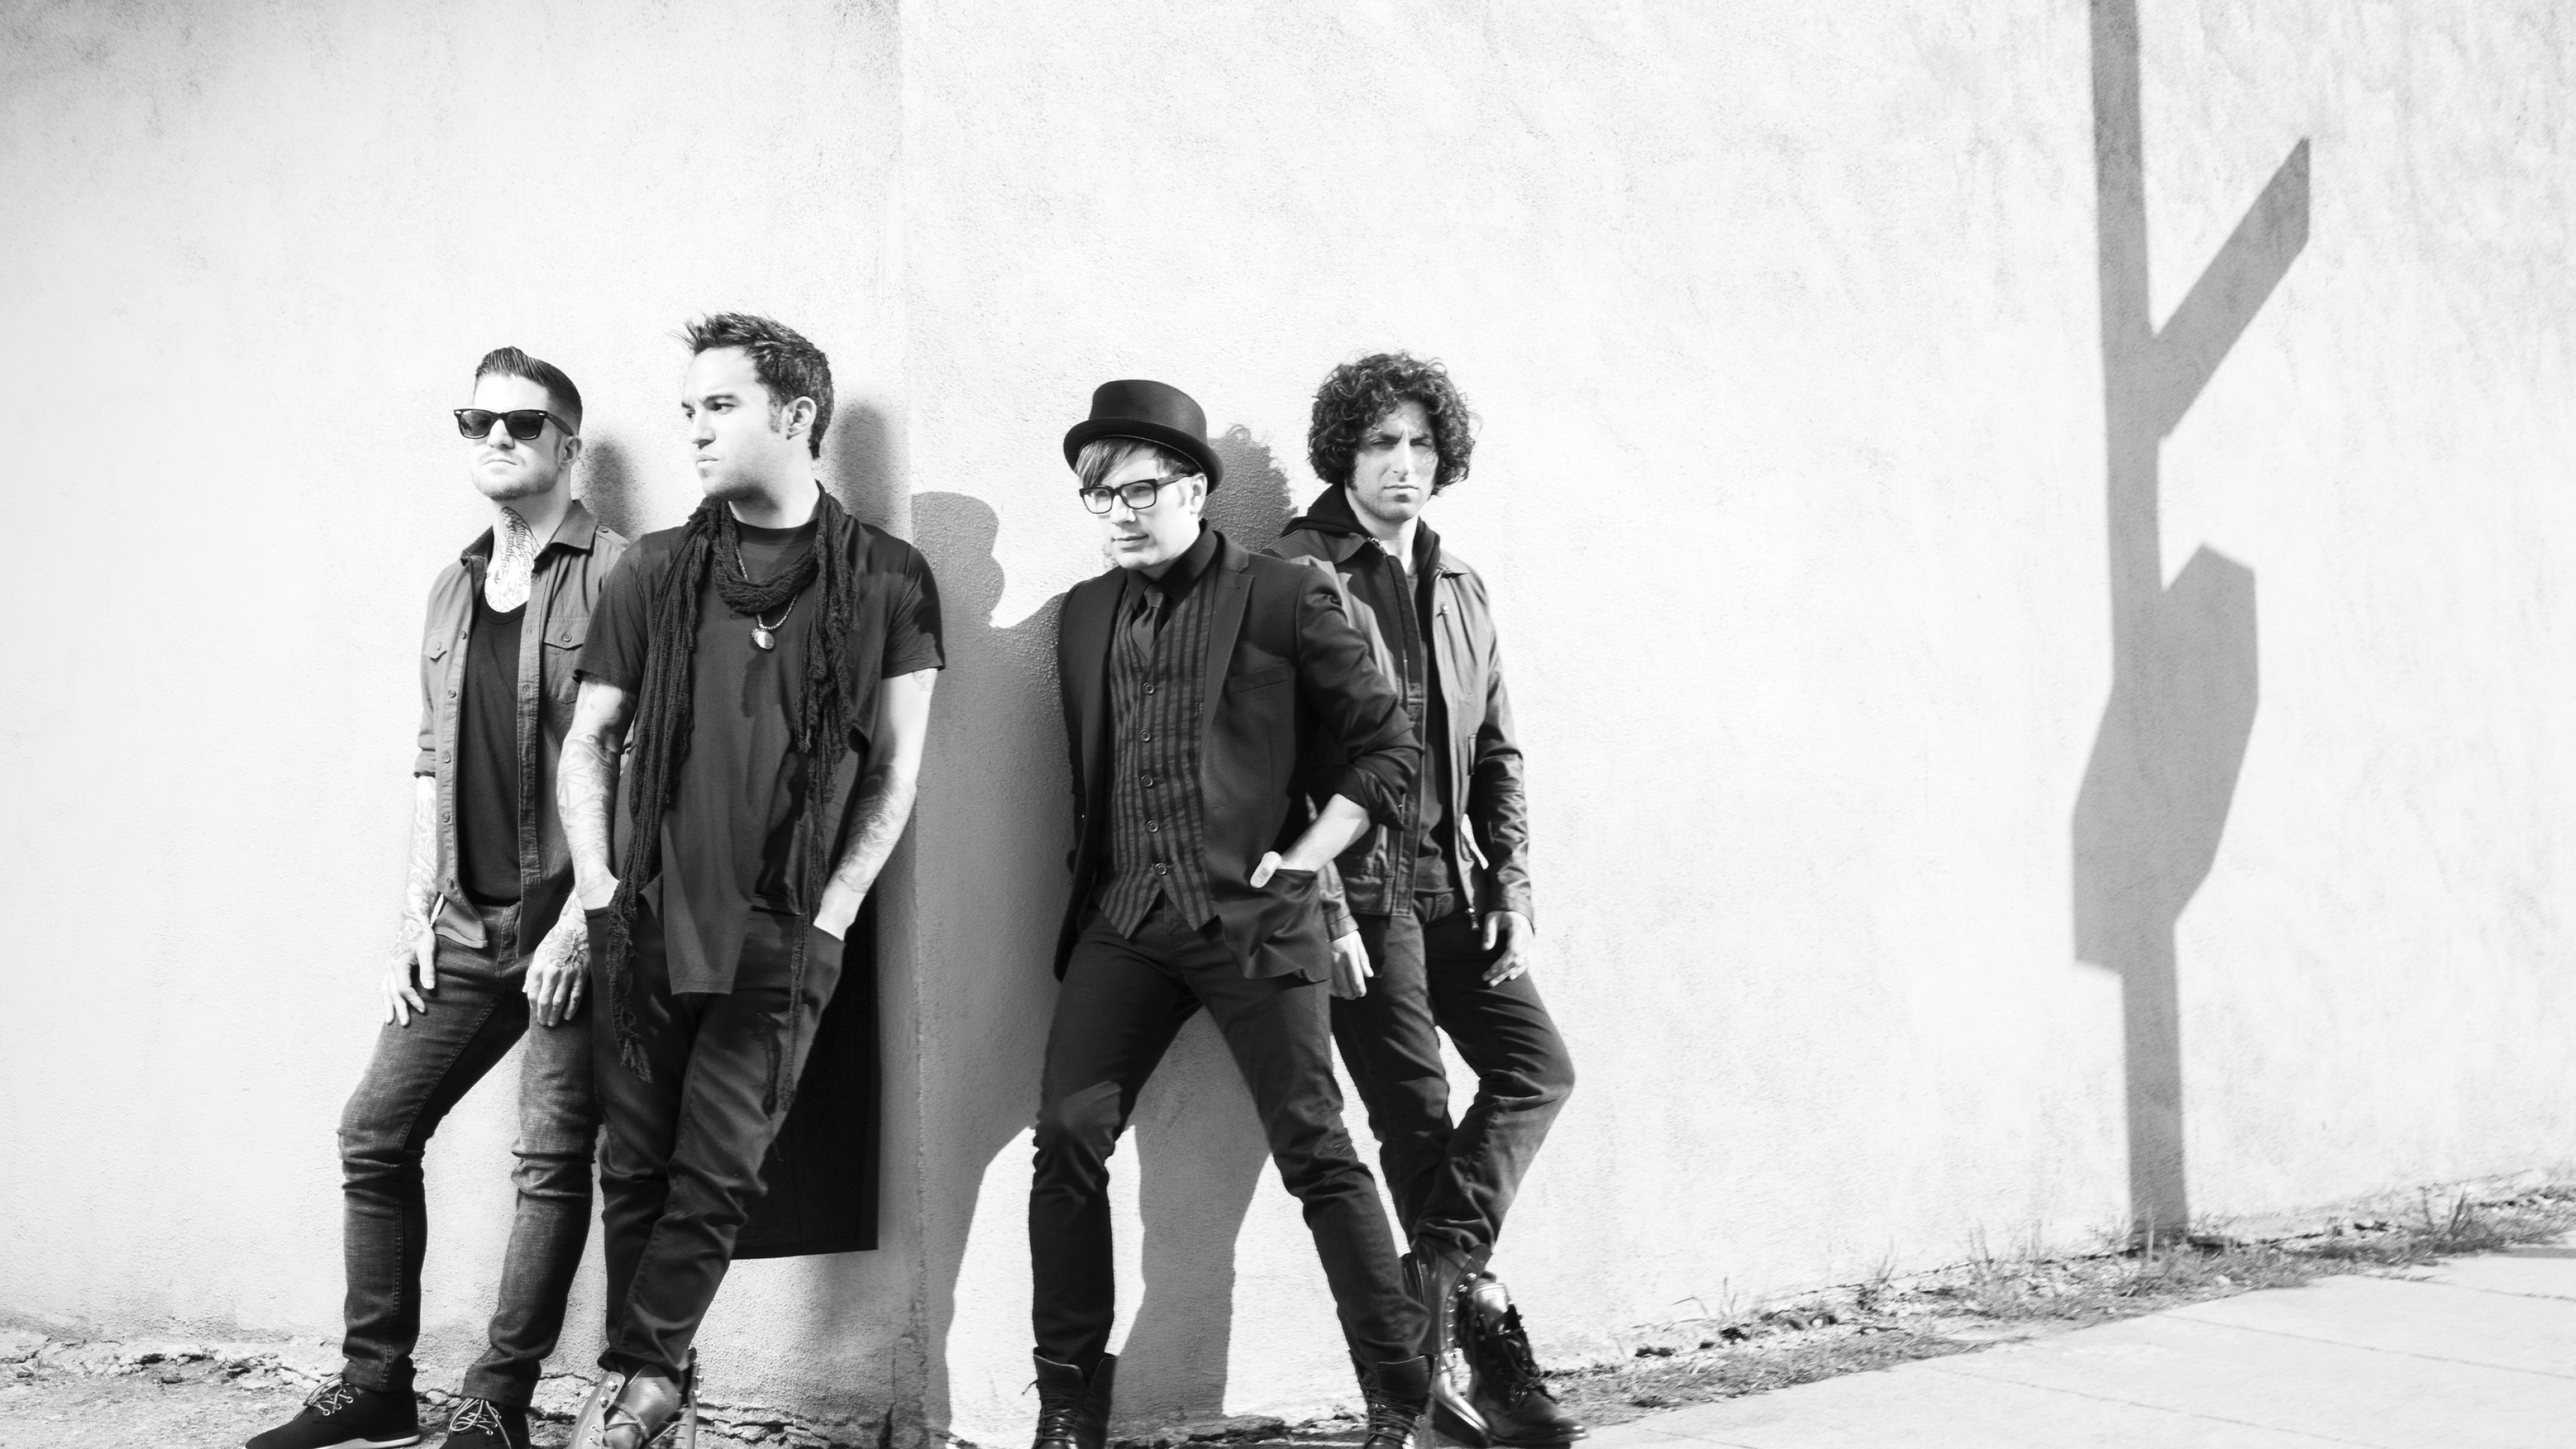 Fall Out Boy, Music artists, Band members, Celebrity wallpapers, 3840x2160 4K Desktop